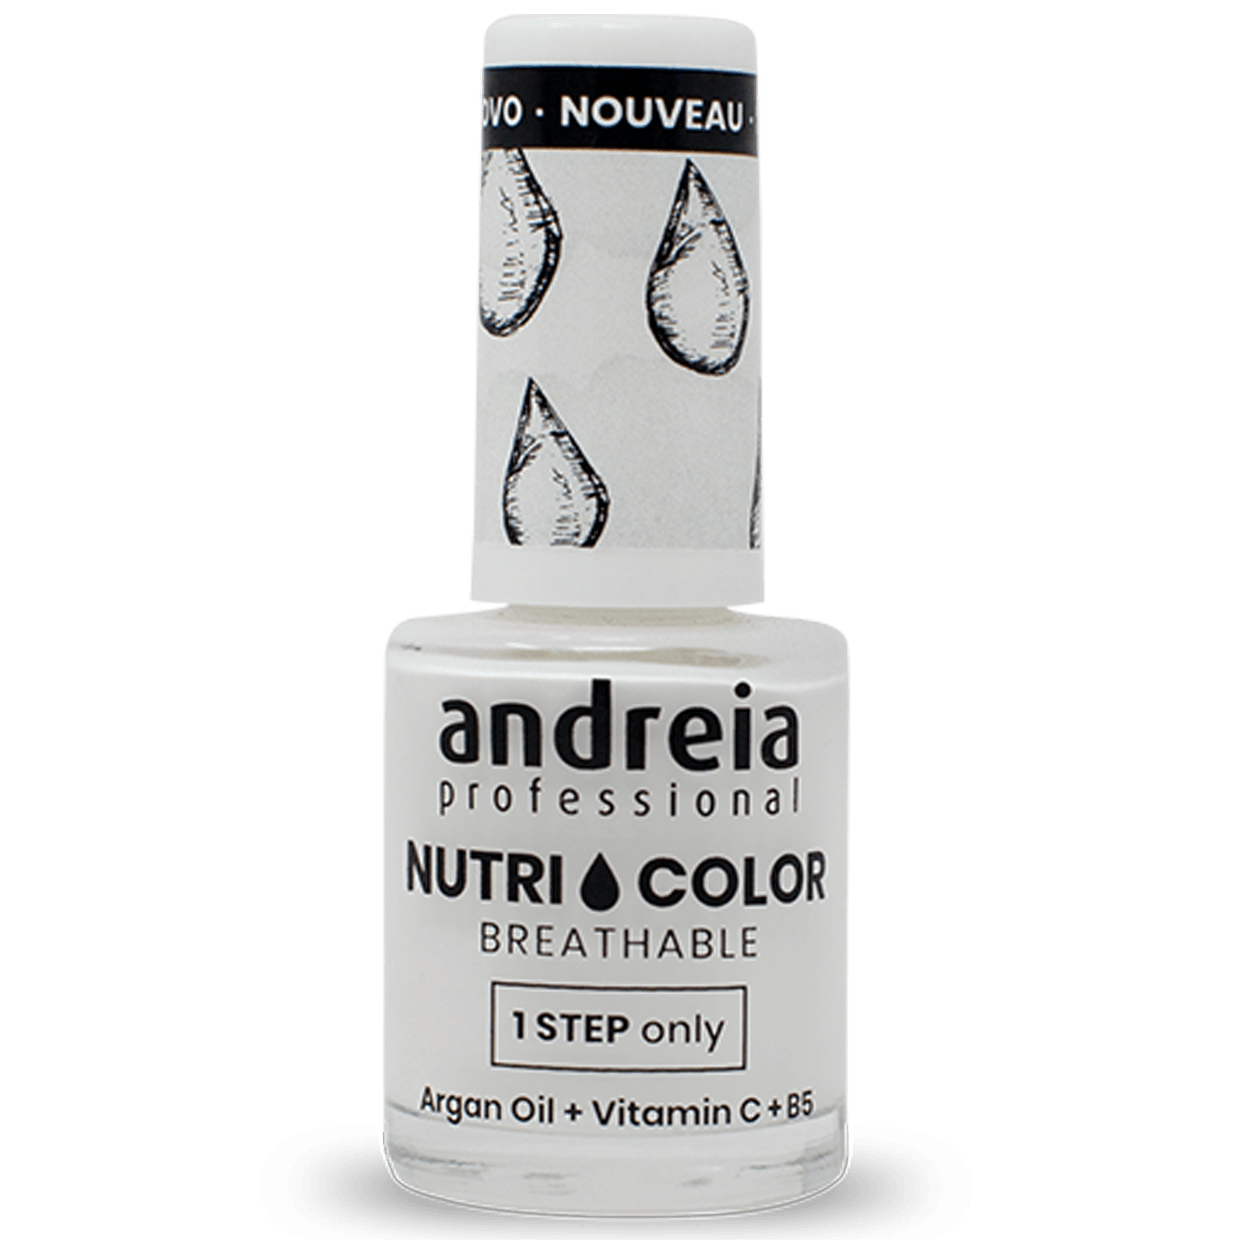 Andreia Professional NutriColor 9Free N1 10.5ml